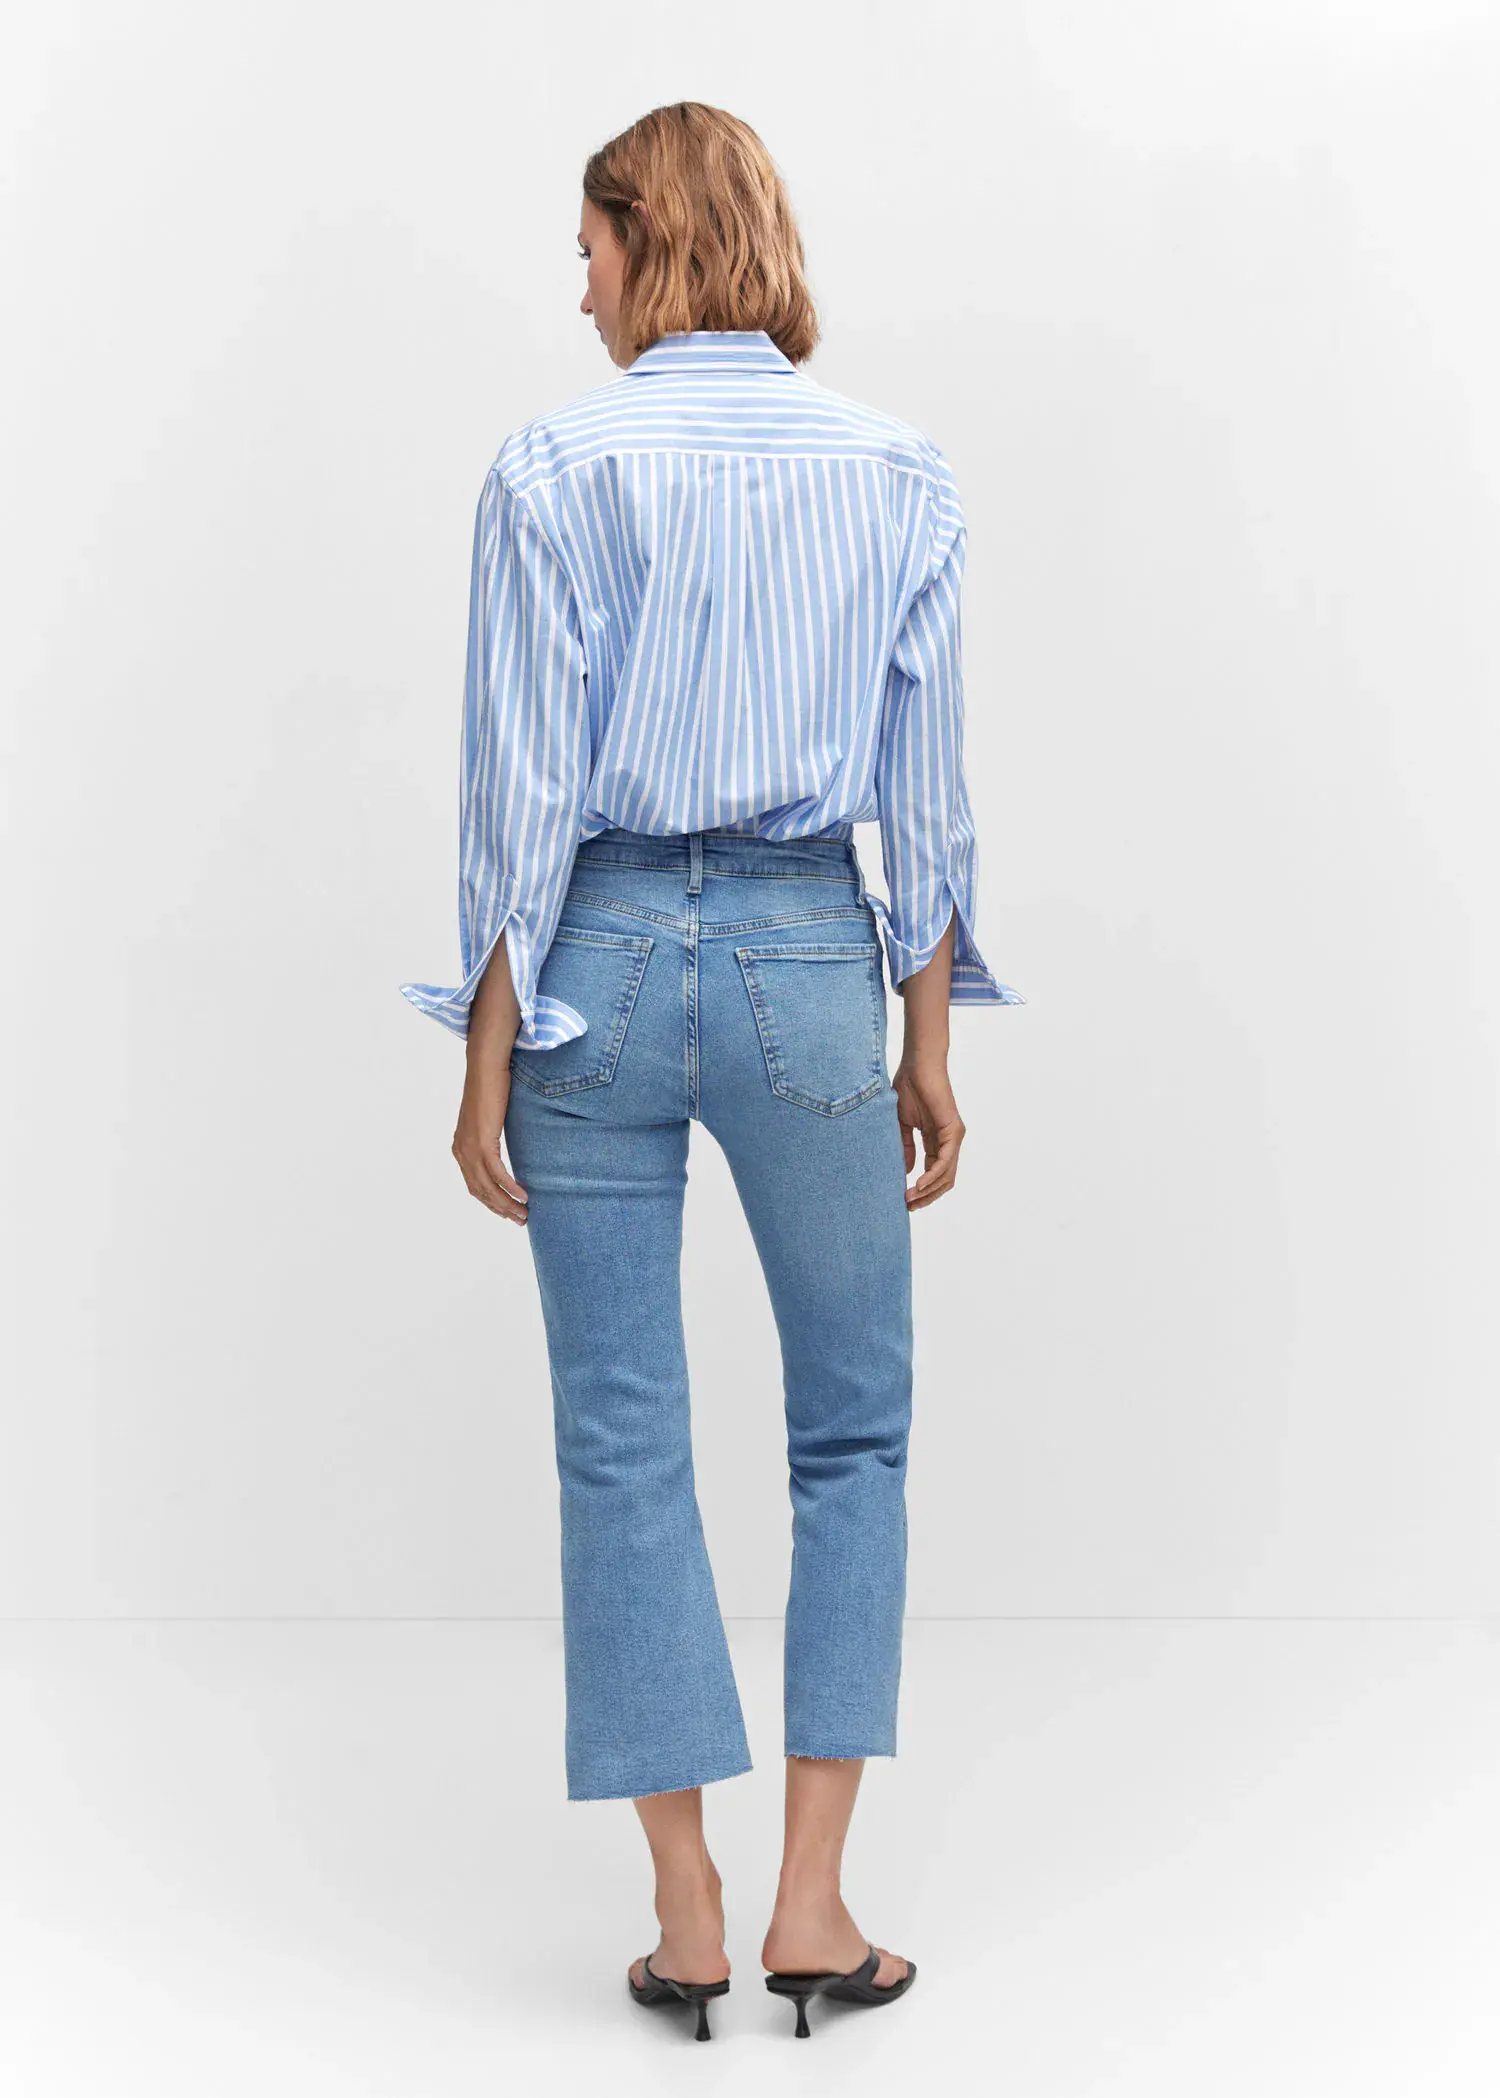 Mango Crop flared jeans. a woman wearing a blue and white striped shirt and jeans. 